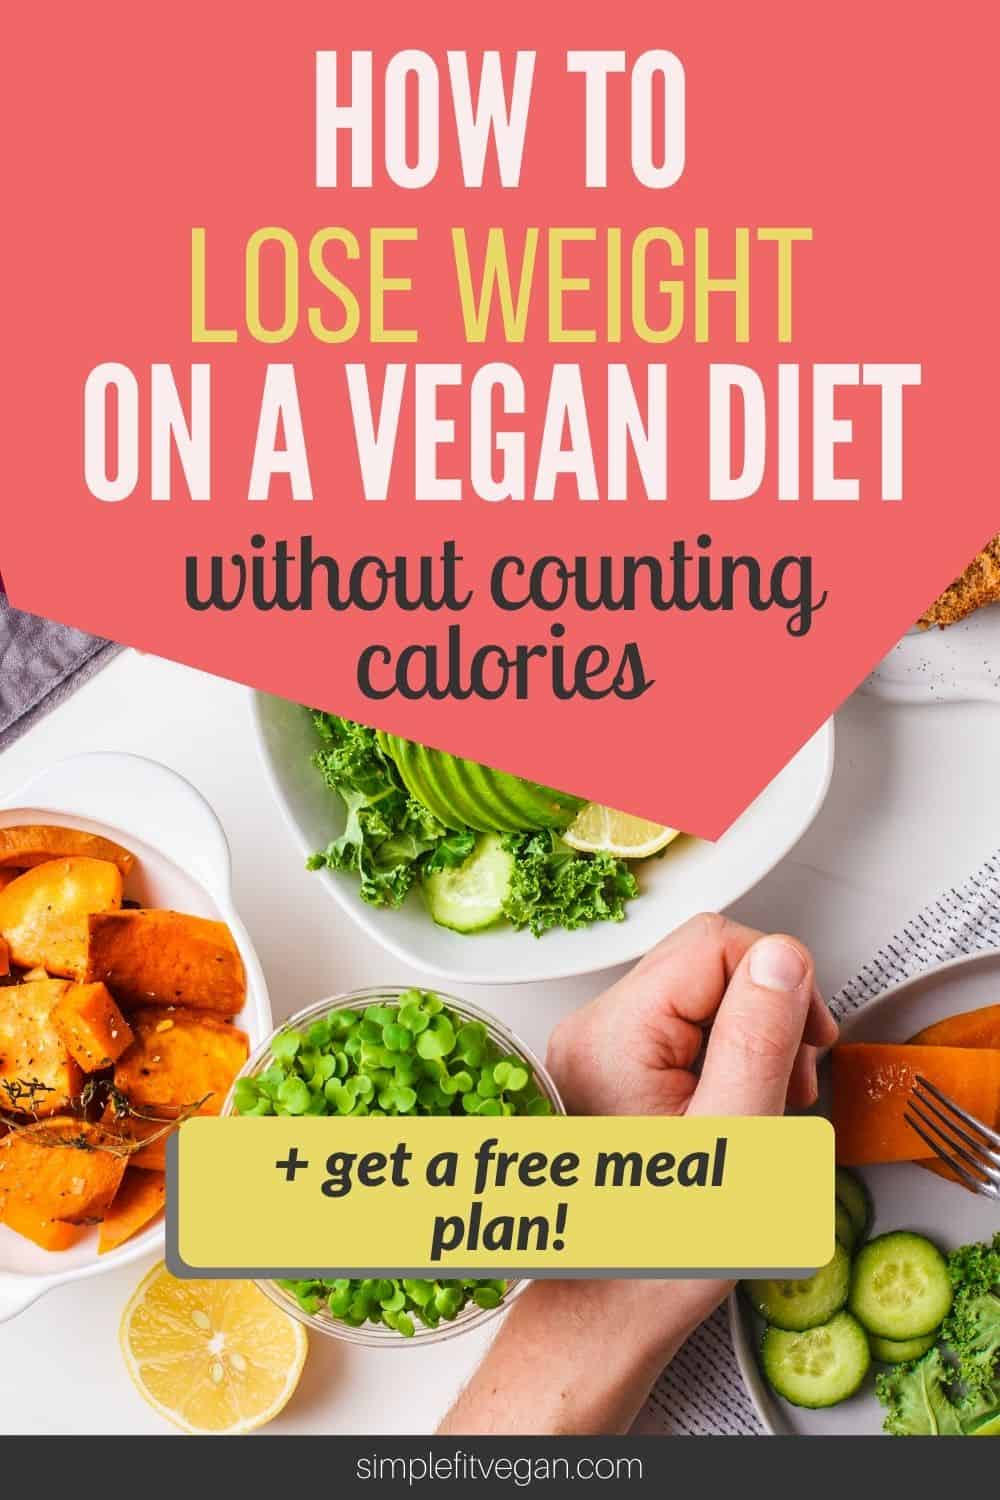 How To Lose Weight On A Vegan Diet Without Counting Calories -  SimpleFitVegan